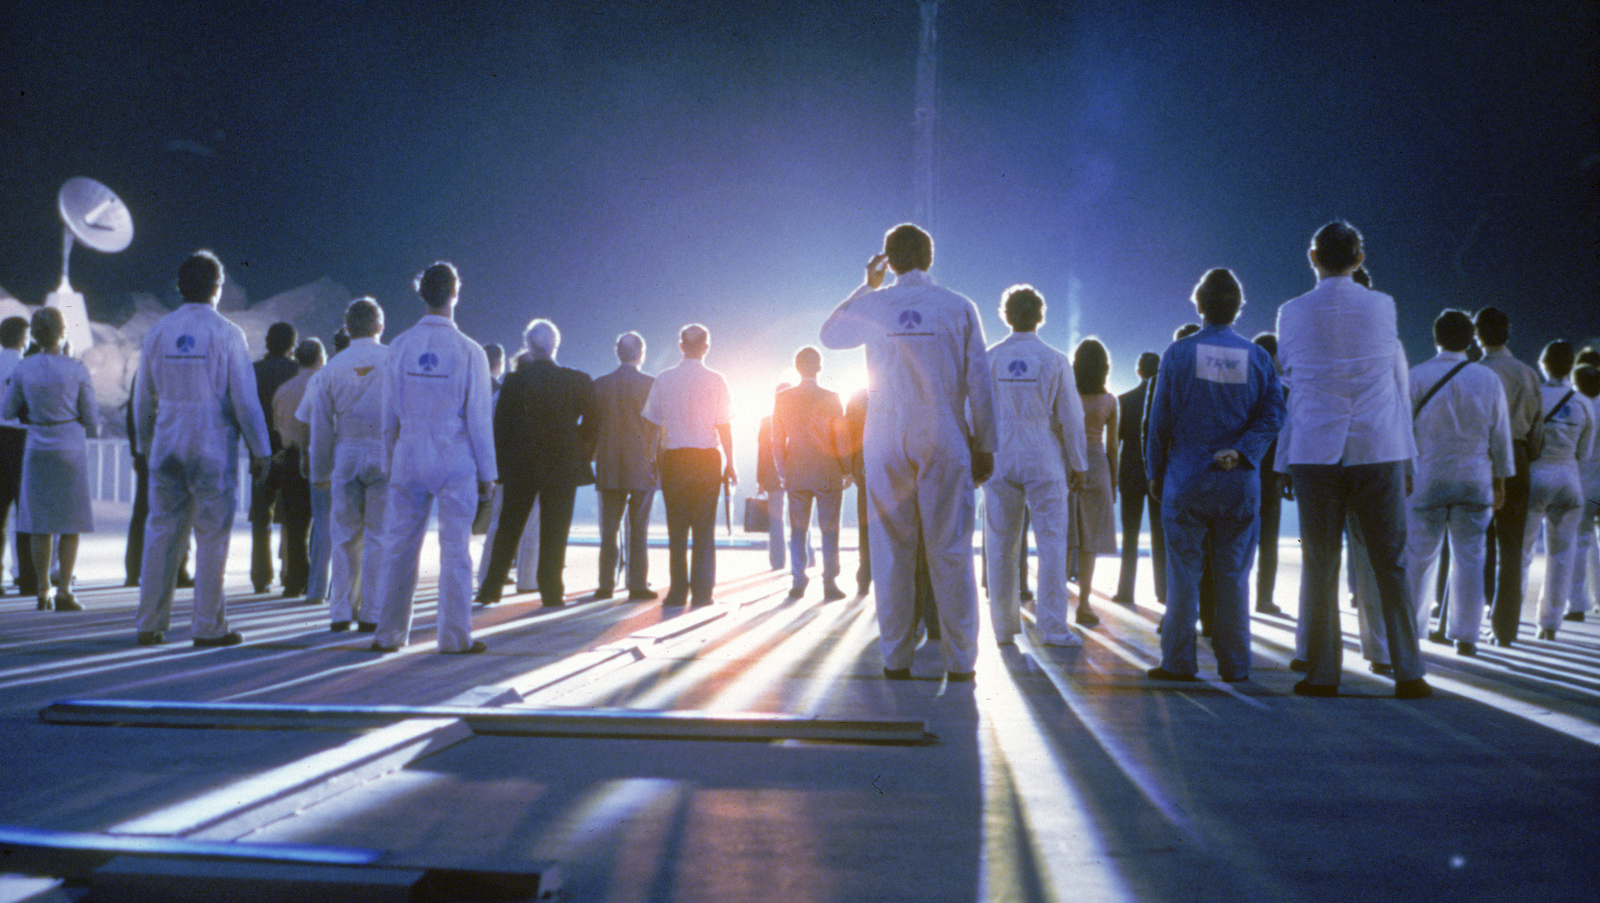 A group of people shot from behind stand on a runway as a bright orange light casts their long shadows on the ground